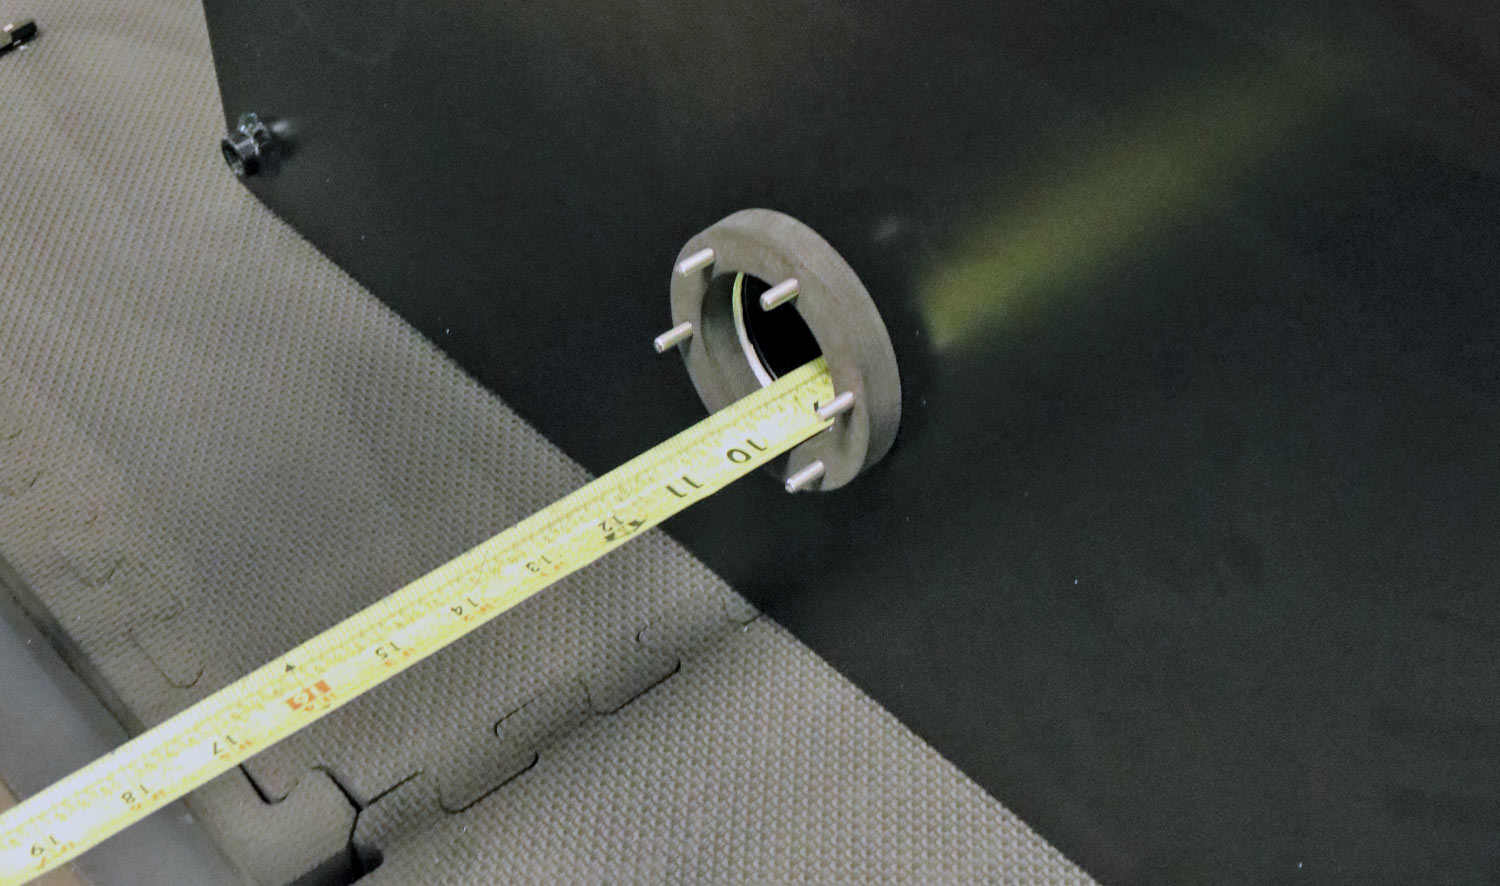 Measuring tape is used to determine the depth of the tank